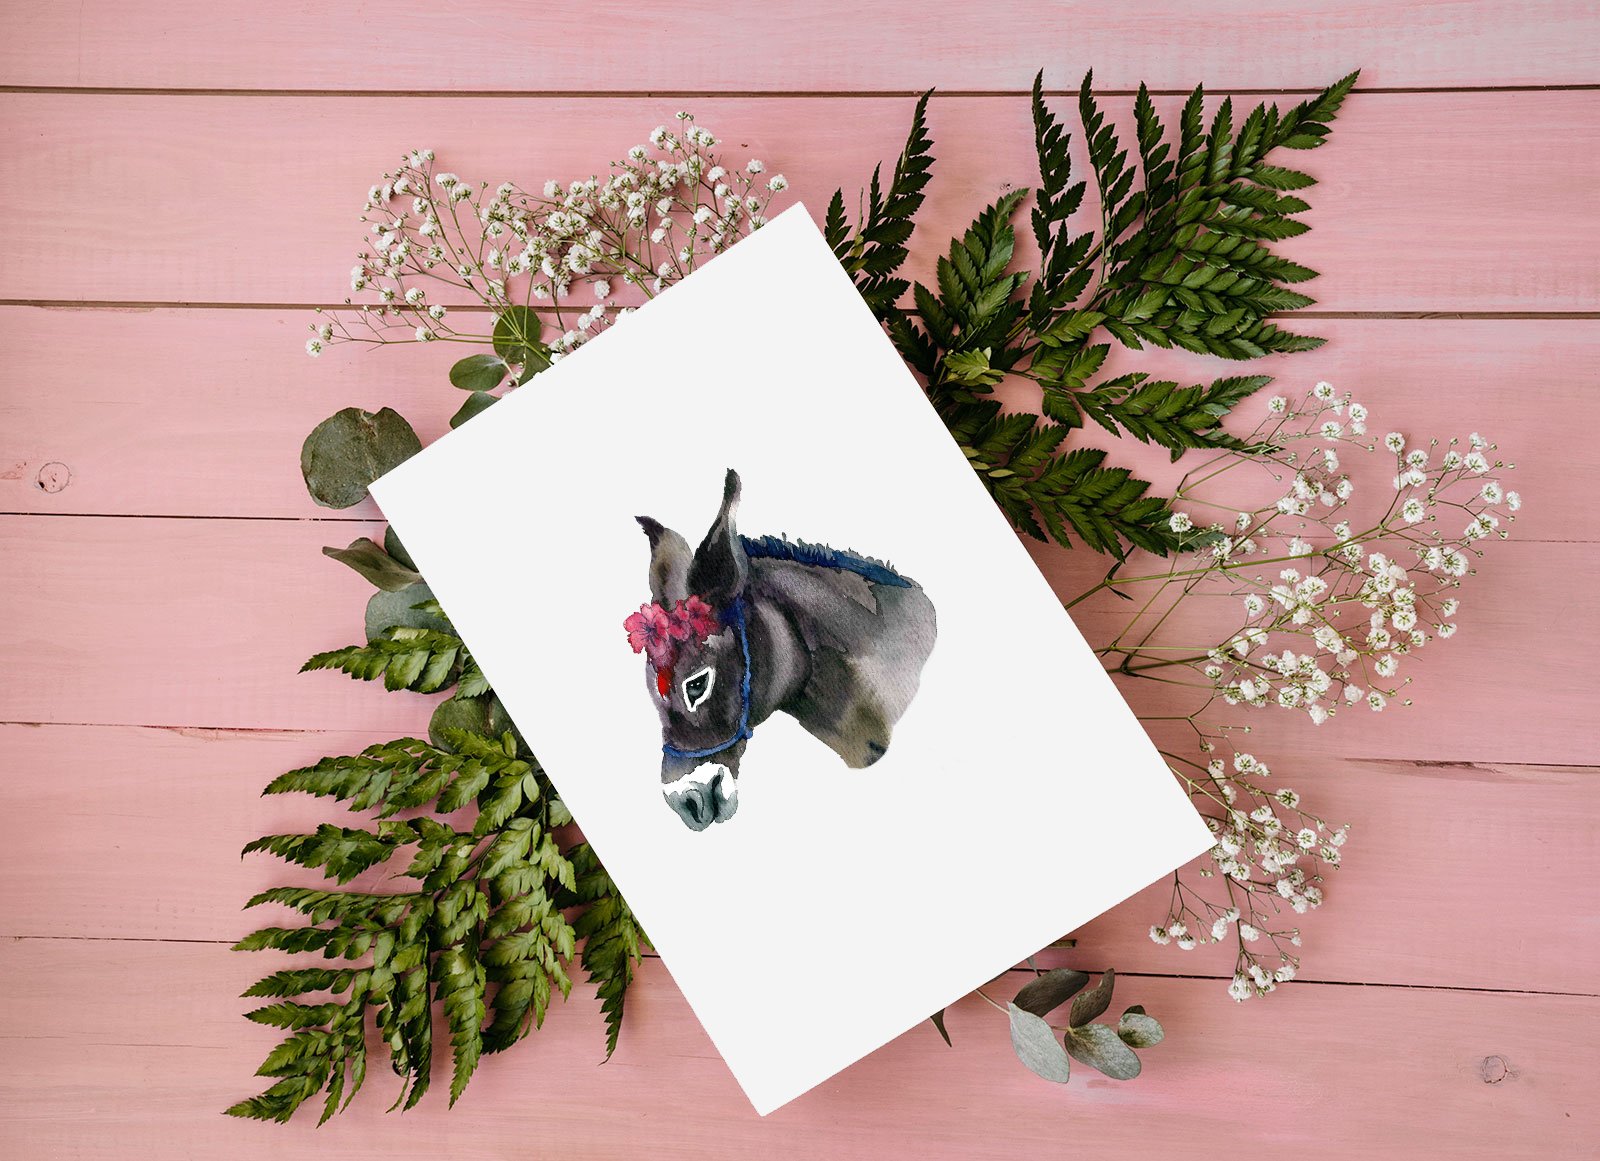 Nice minimalistic white card with the horse.